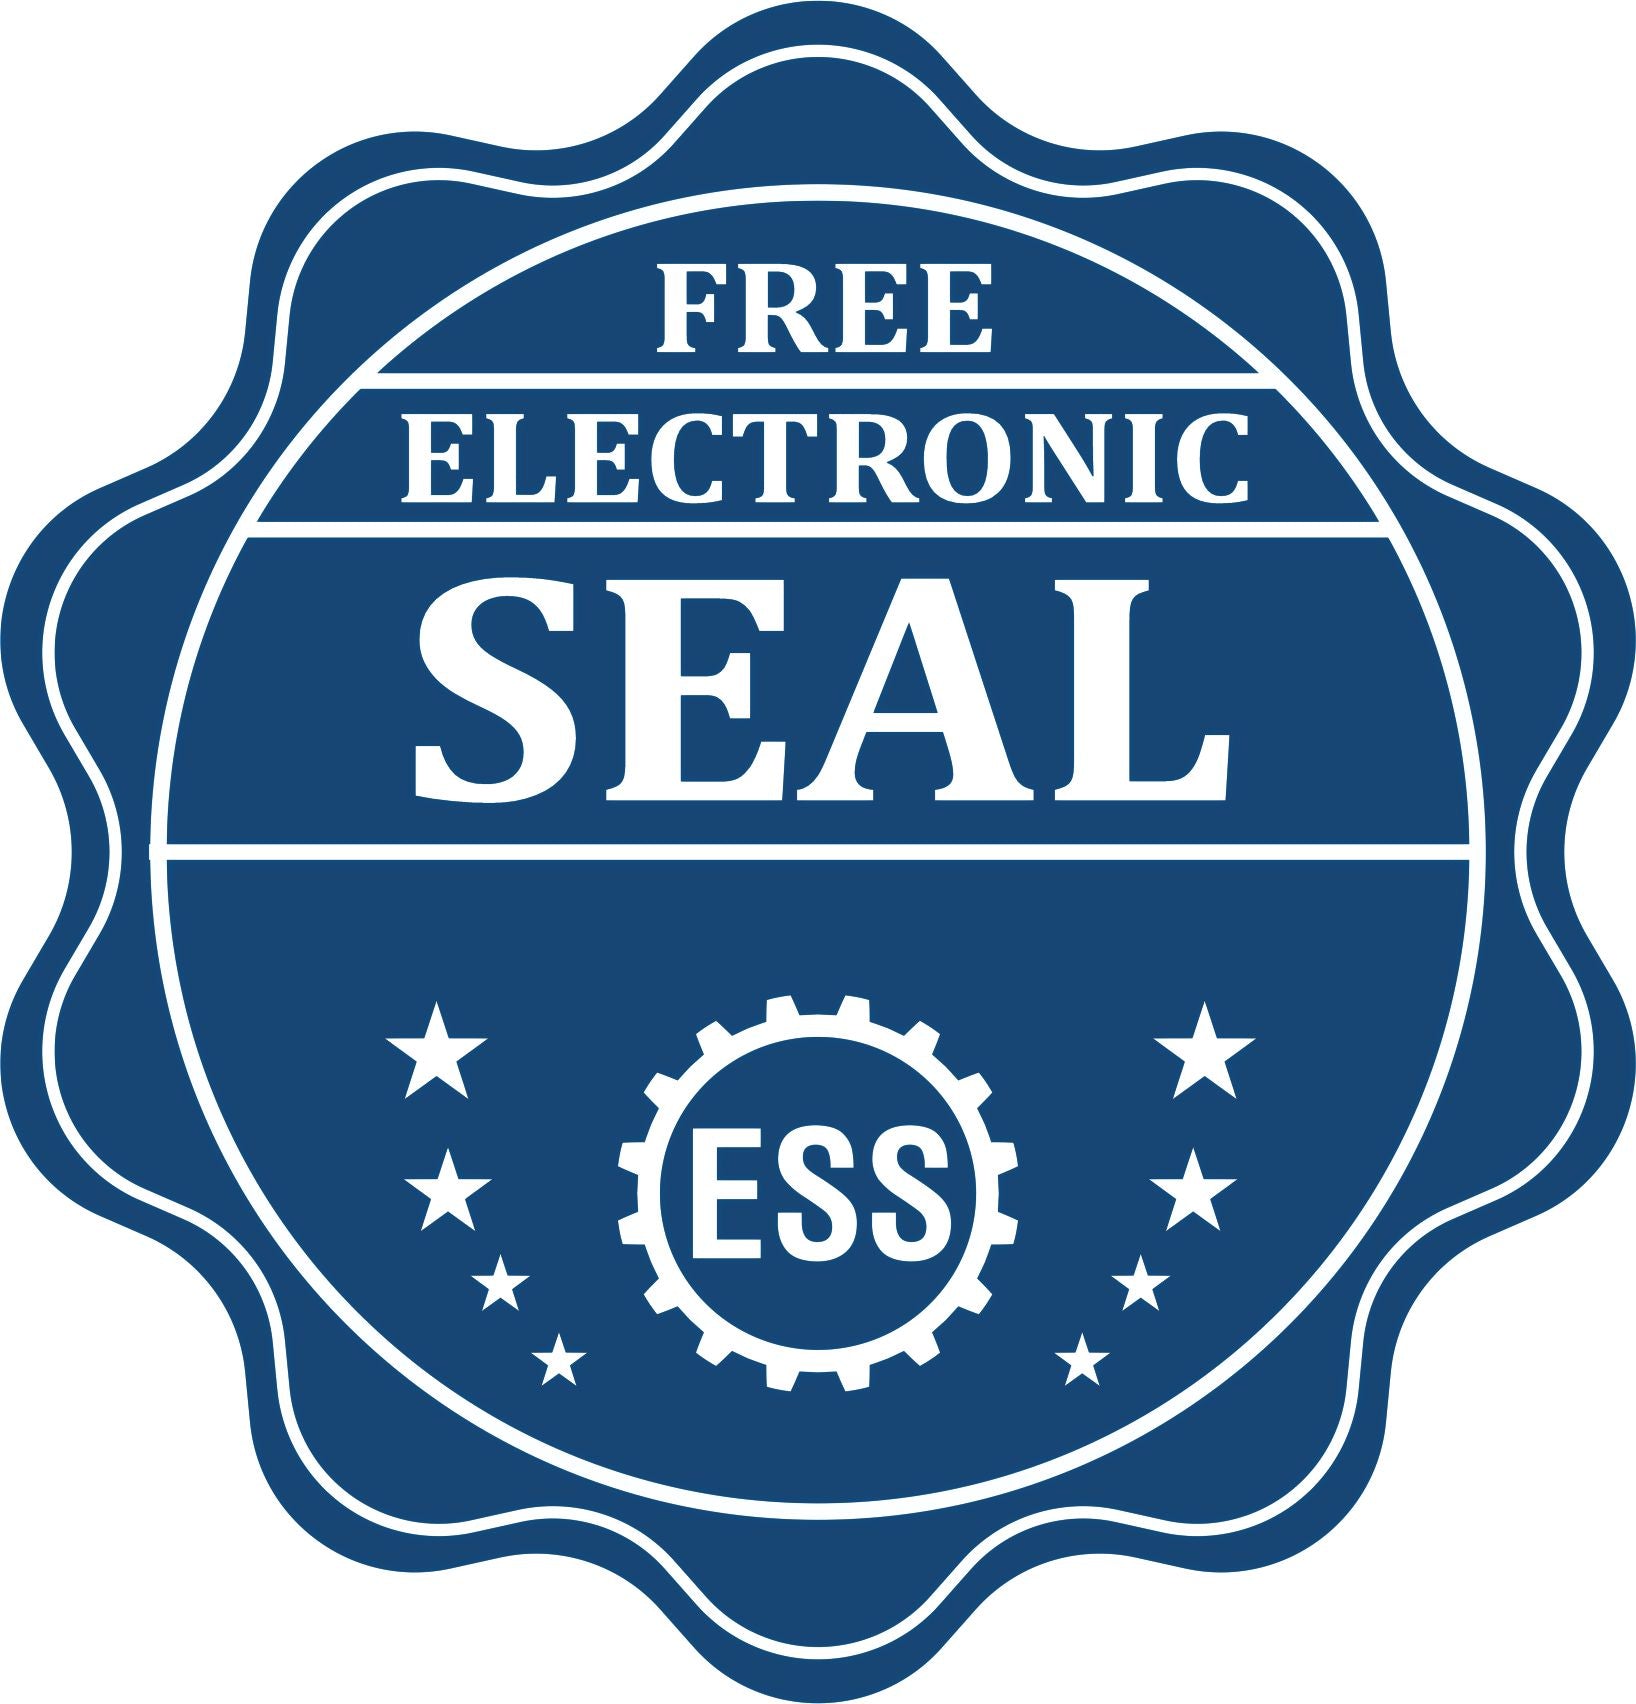 A badge showing a free electronic seal for the Handheld Maryland Professional Geologist Embosser with stars and the ESS gear on the emblem.